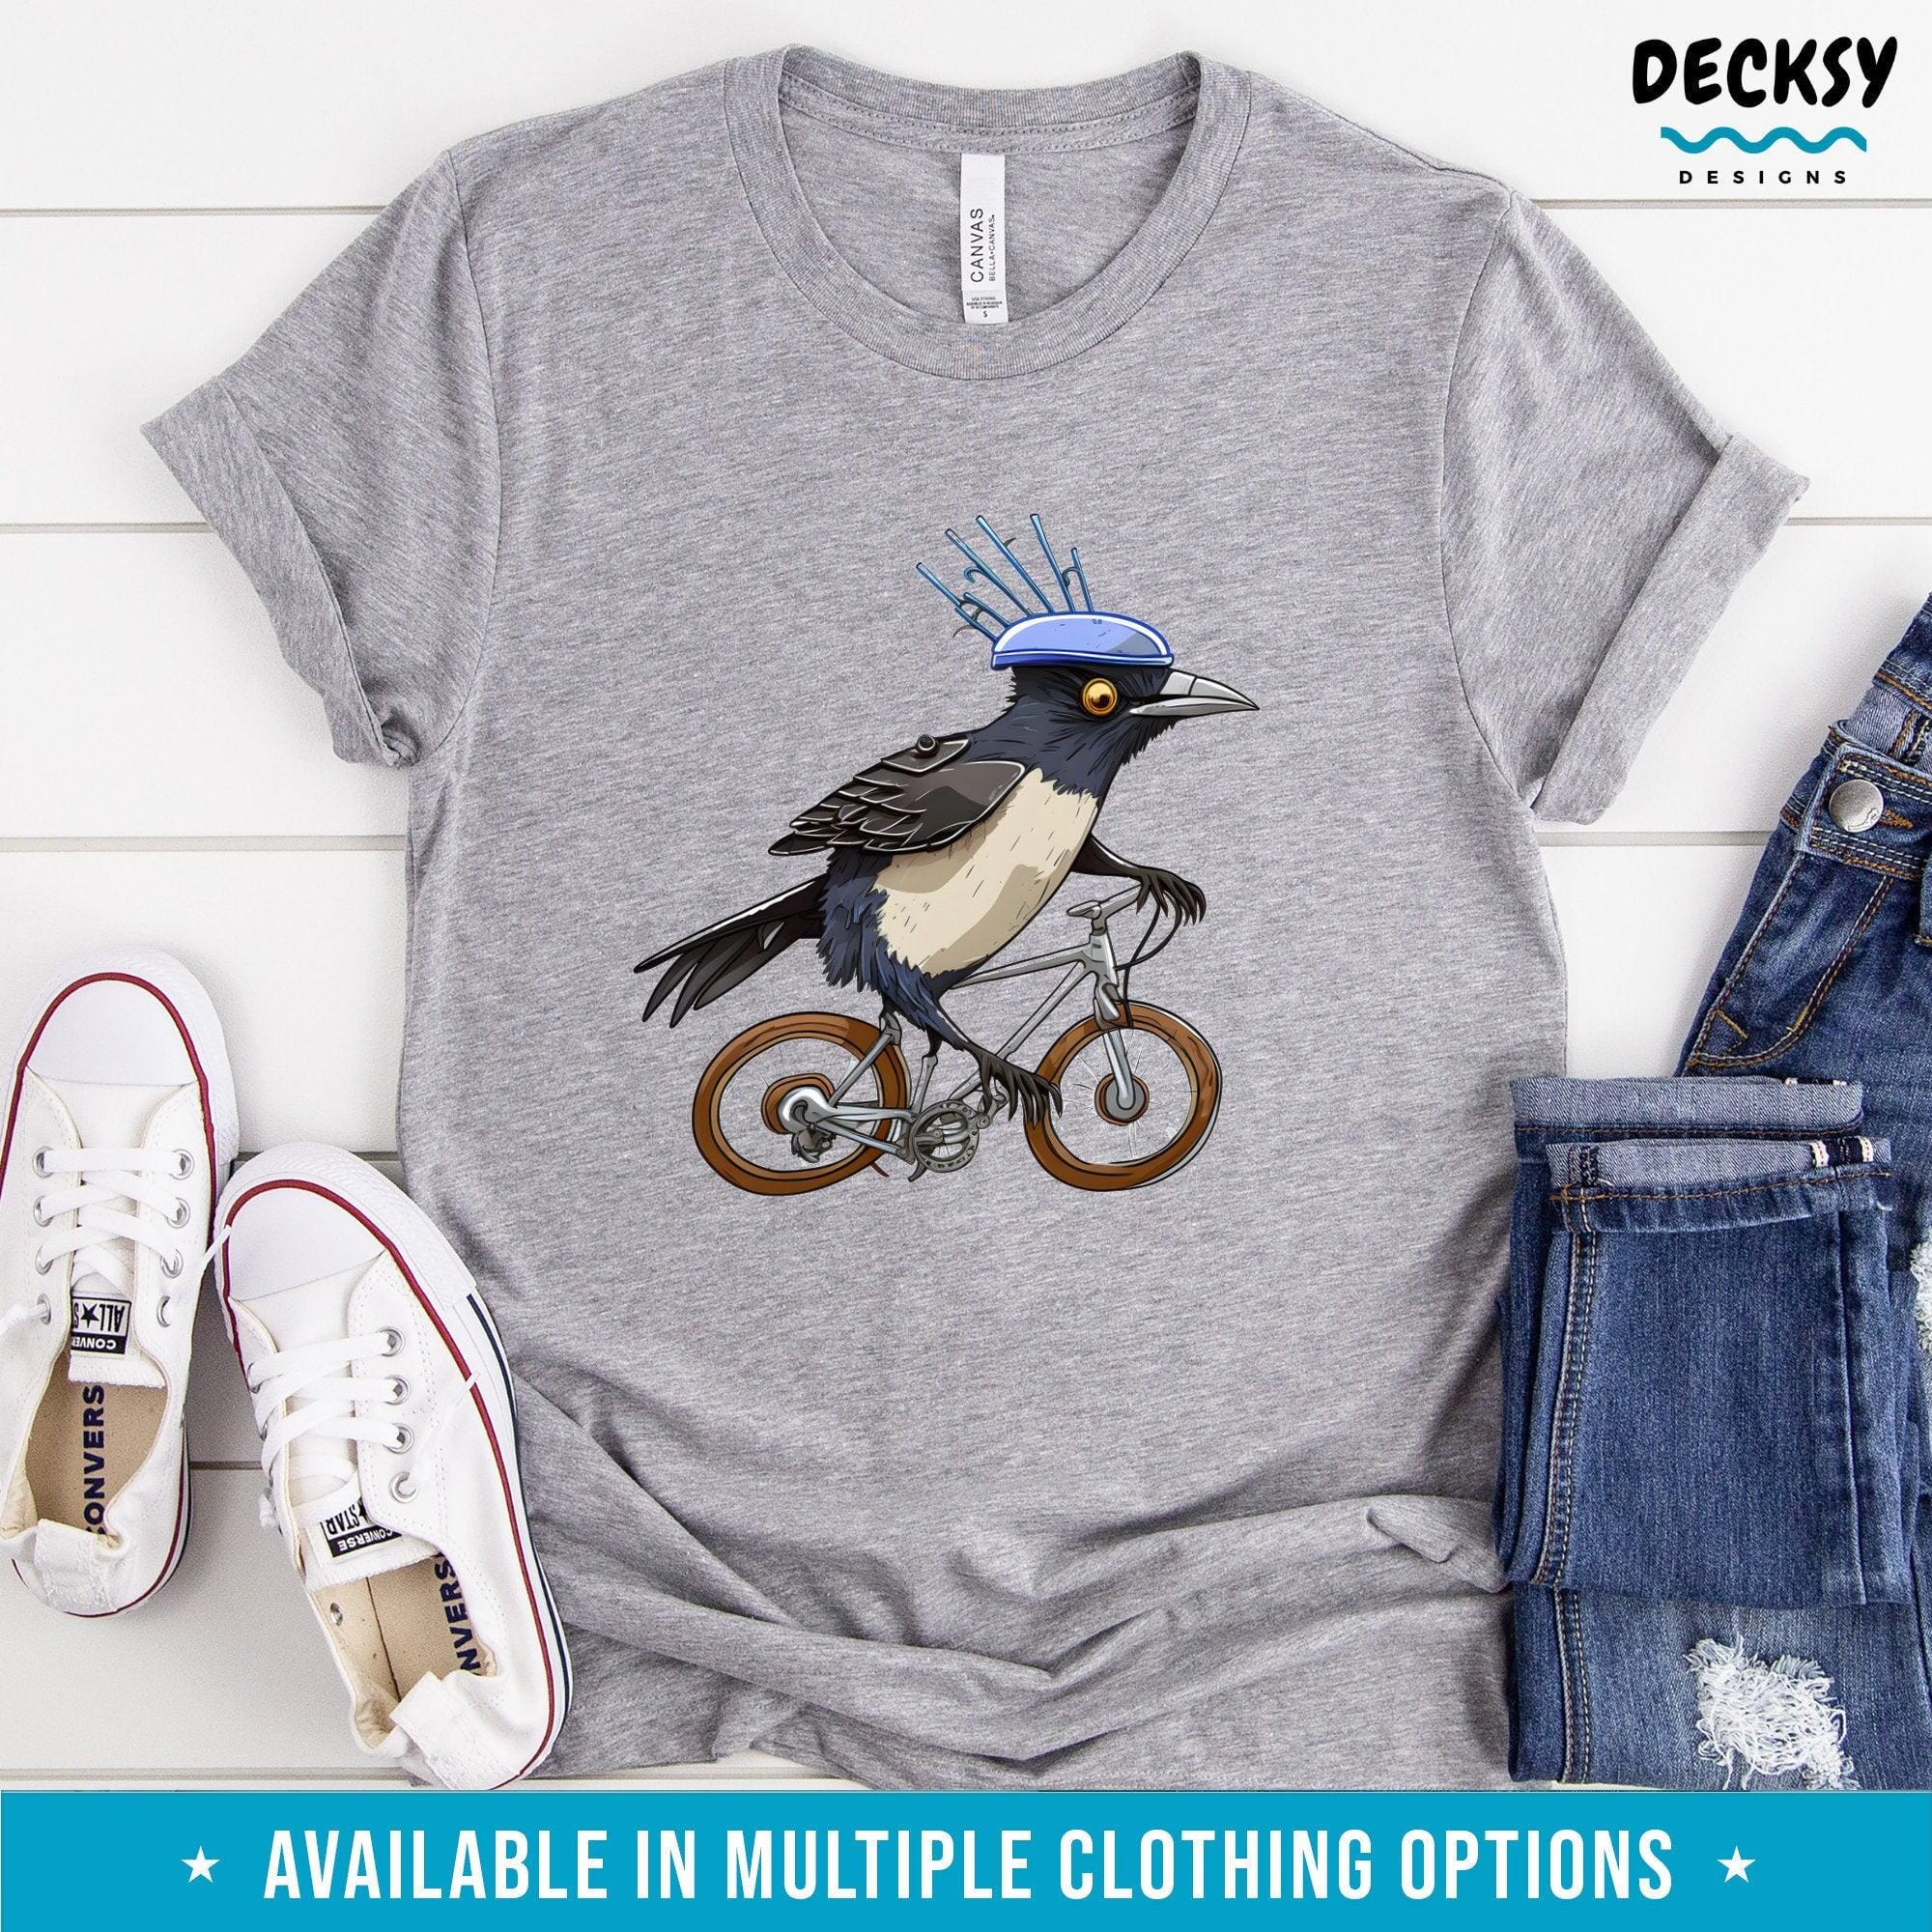 Magpie on a Bike Shirt, Funny Australian Birds Gift-Clothing:Gender-Neutral Adult Clothing:Tops & Tees:T-shirts:Graphic Tees-DecksyDesigns